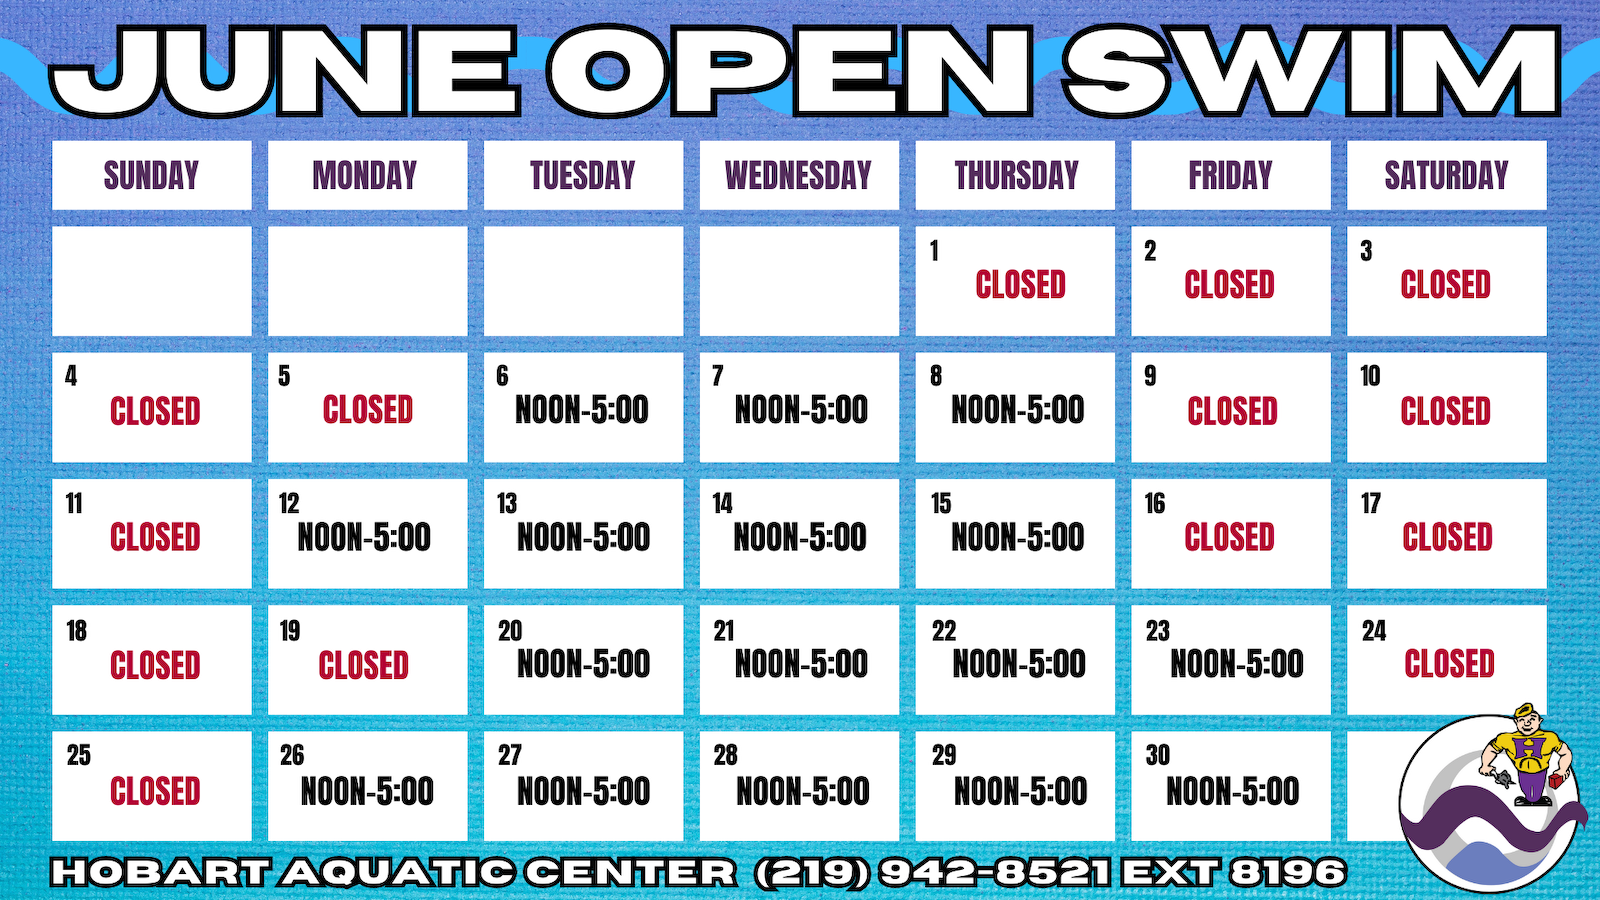 HHS Open Swim Calendar - Revised.png